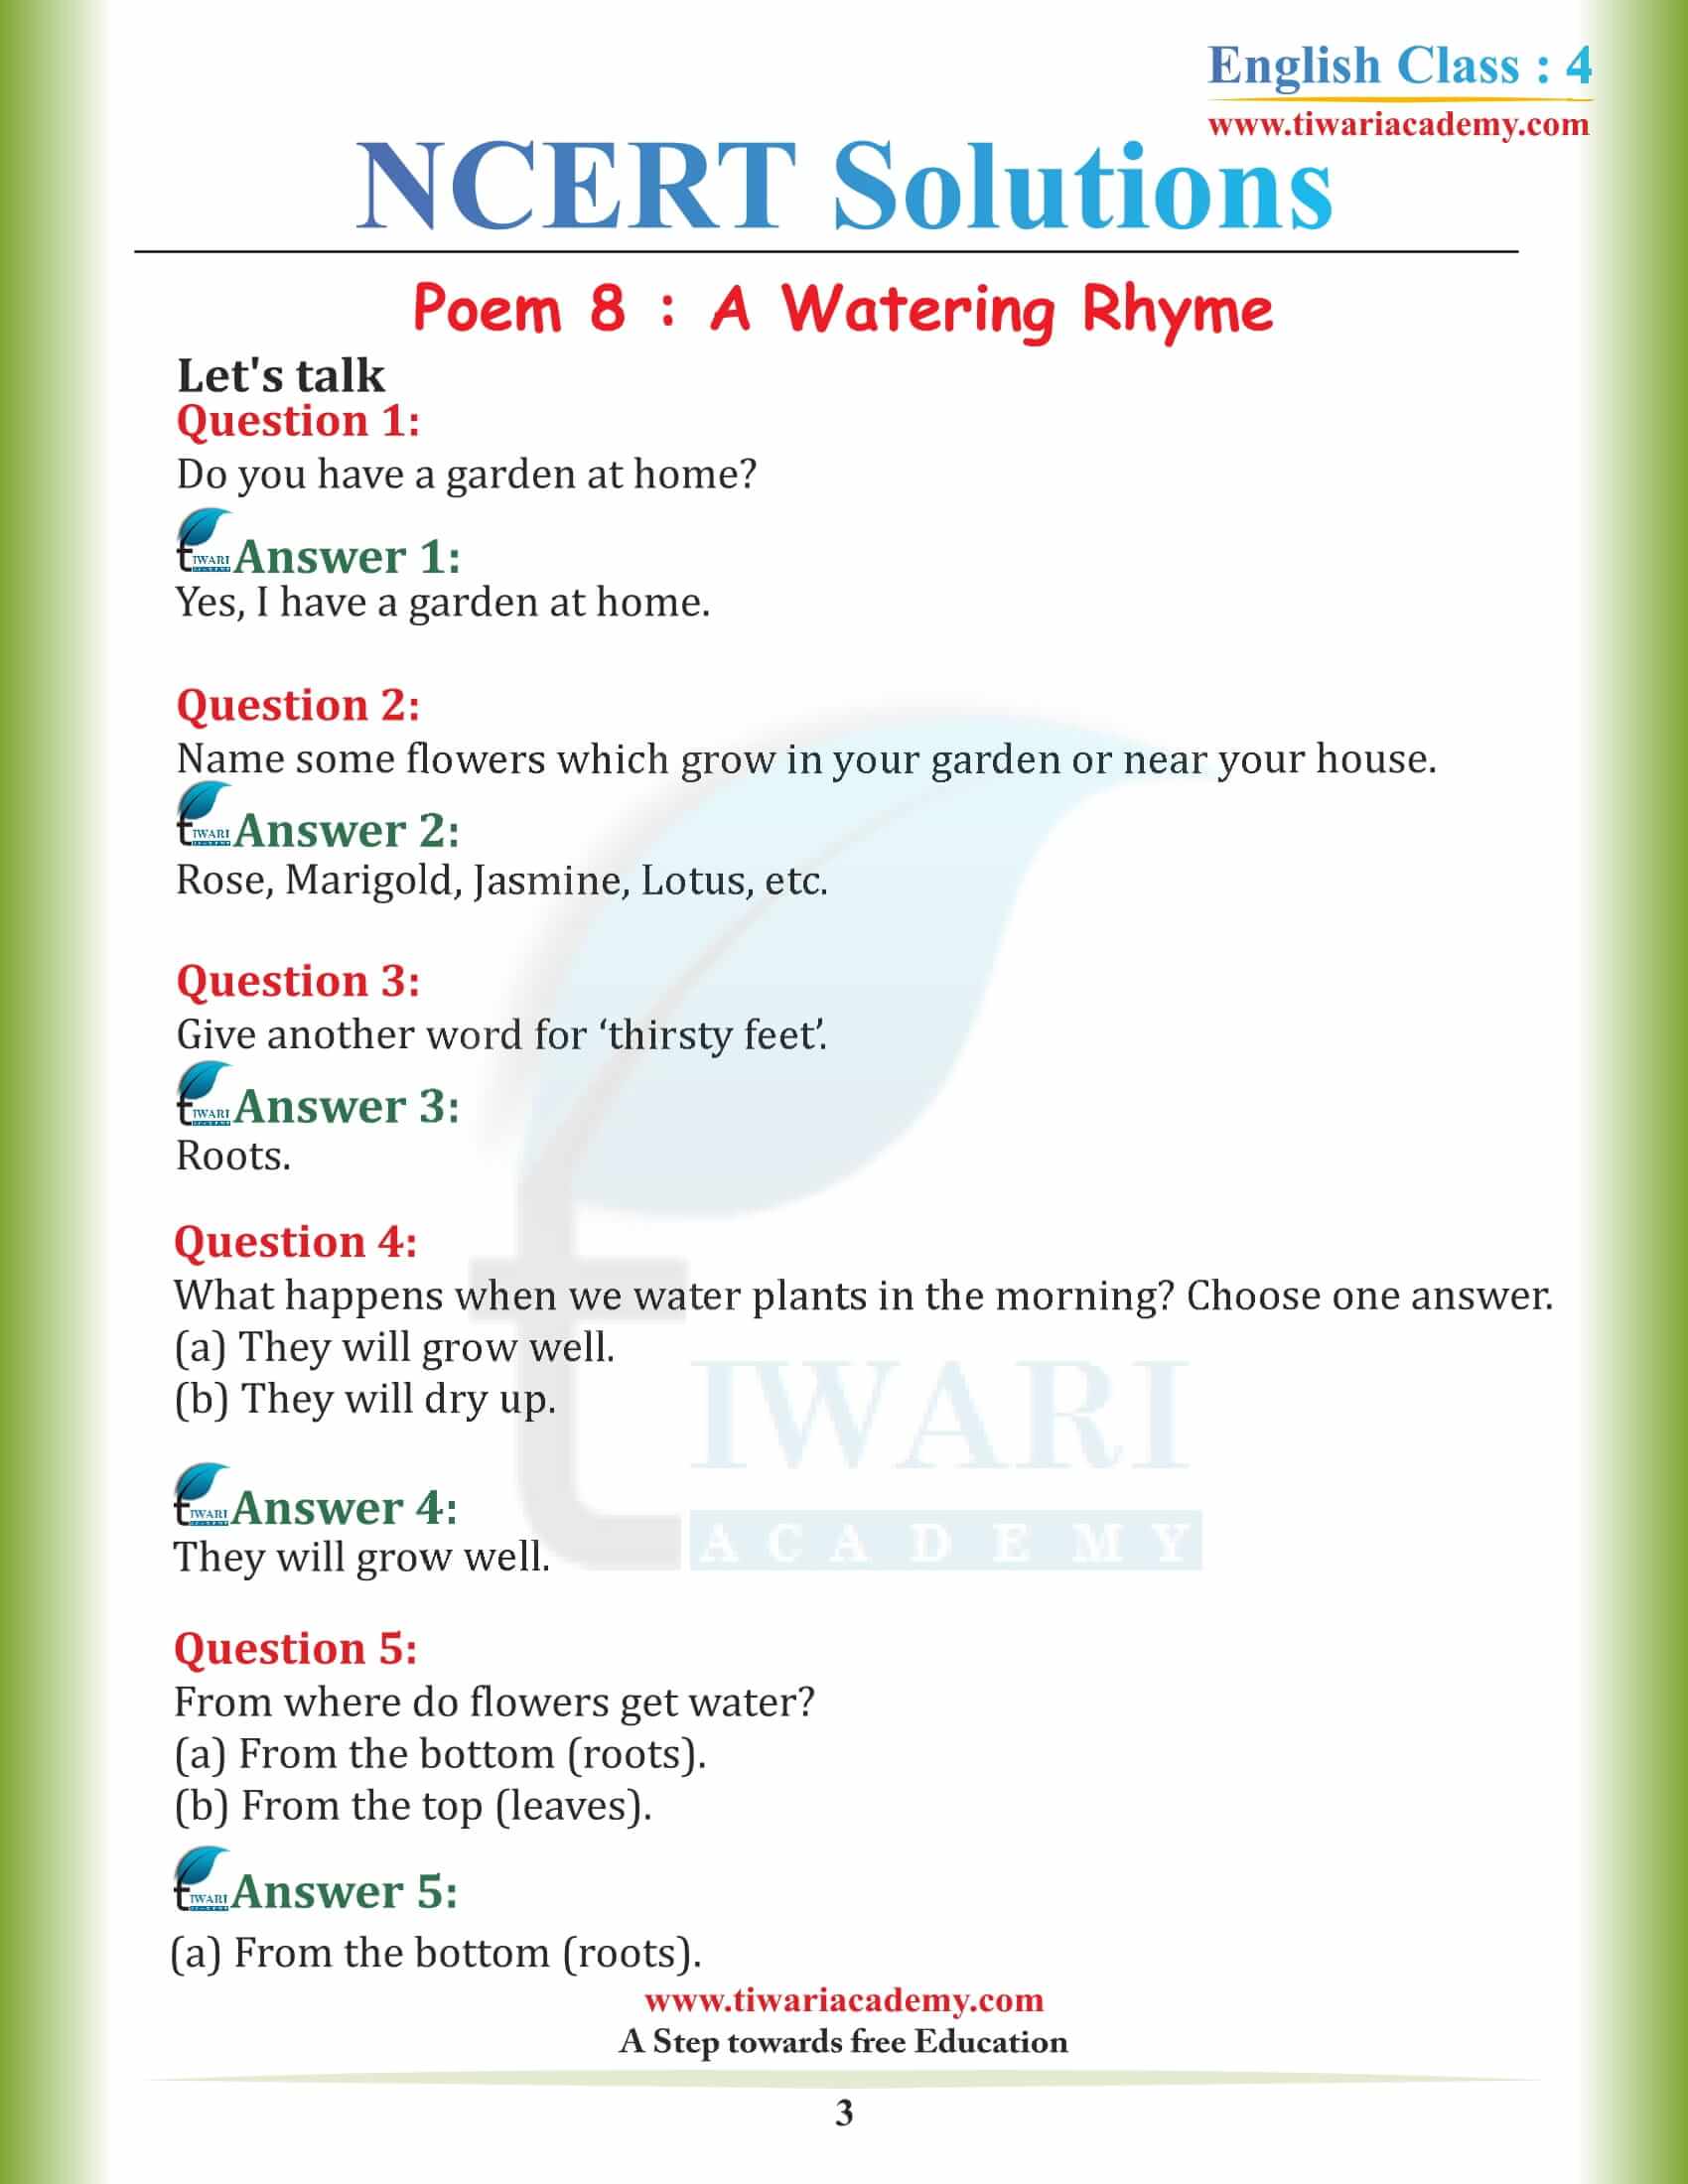 NCERT Solutions for Class 4 English Unit 8